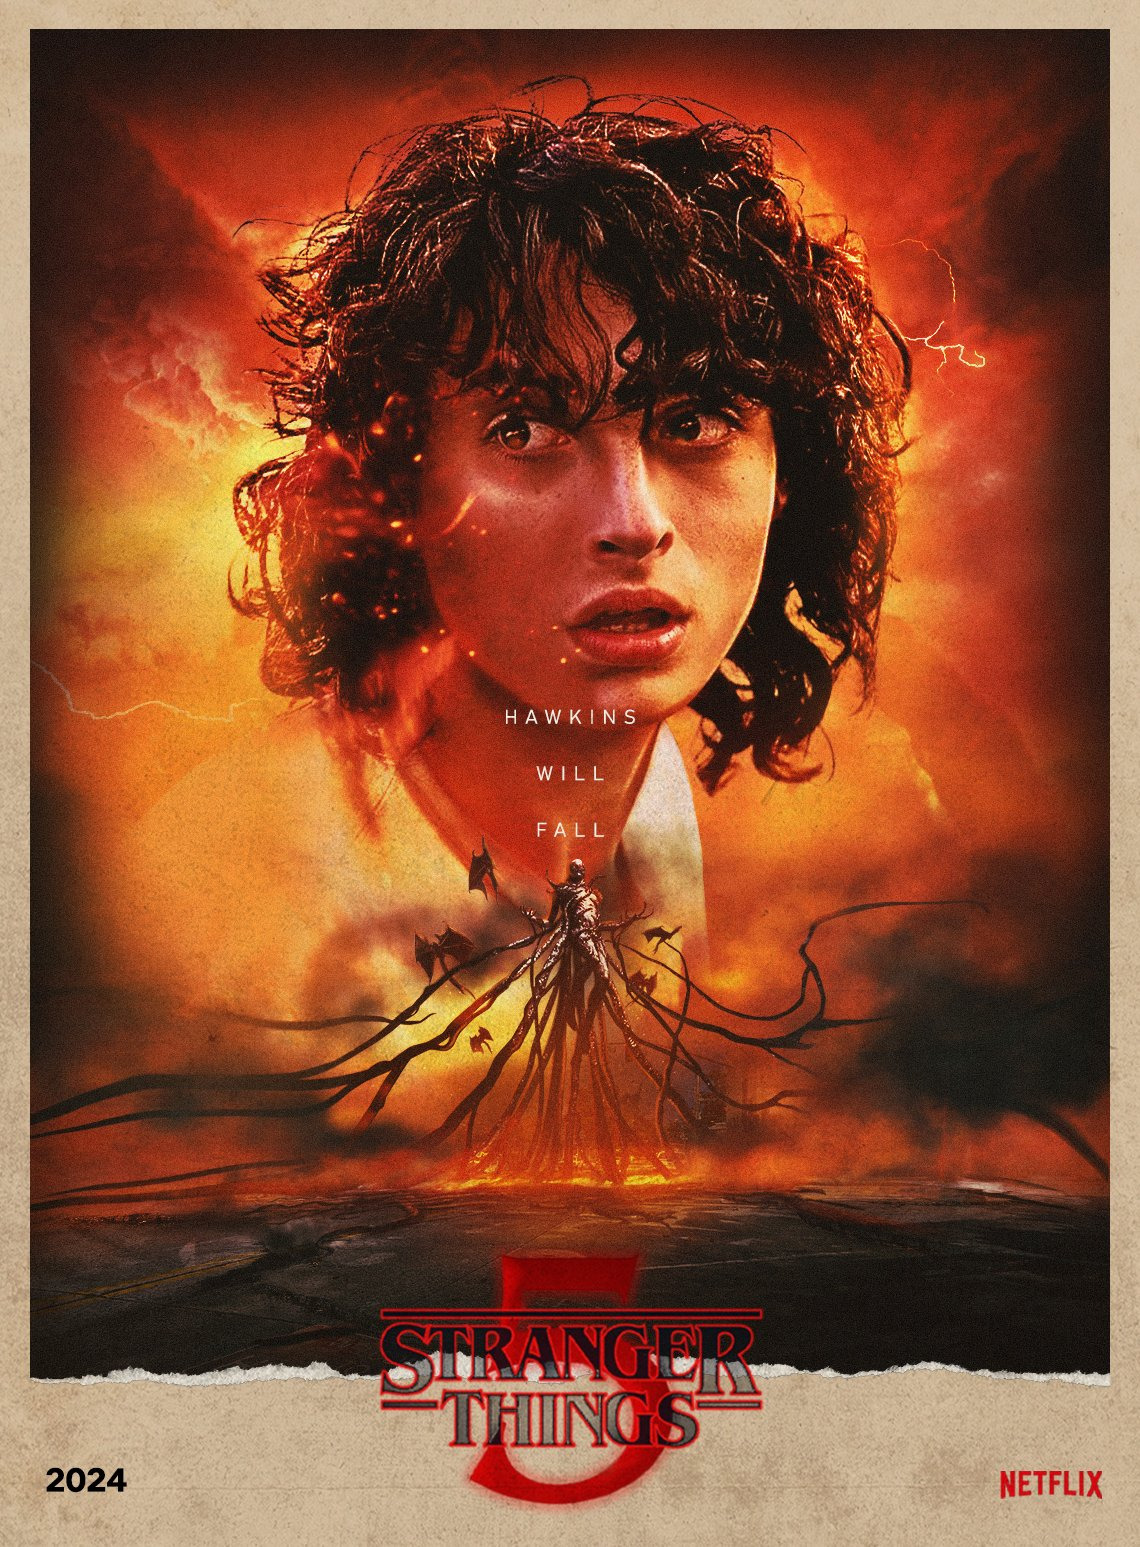 almirondesign — STRANGER THINGS 5 FANART POSTER Fight for what